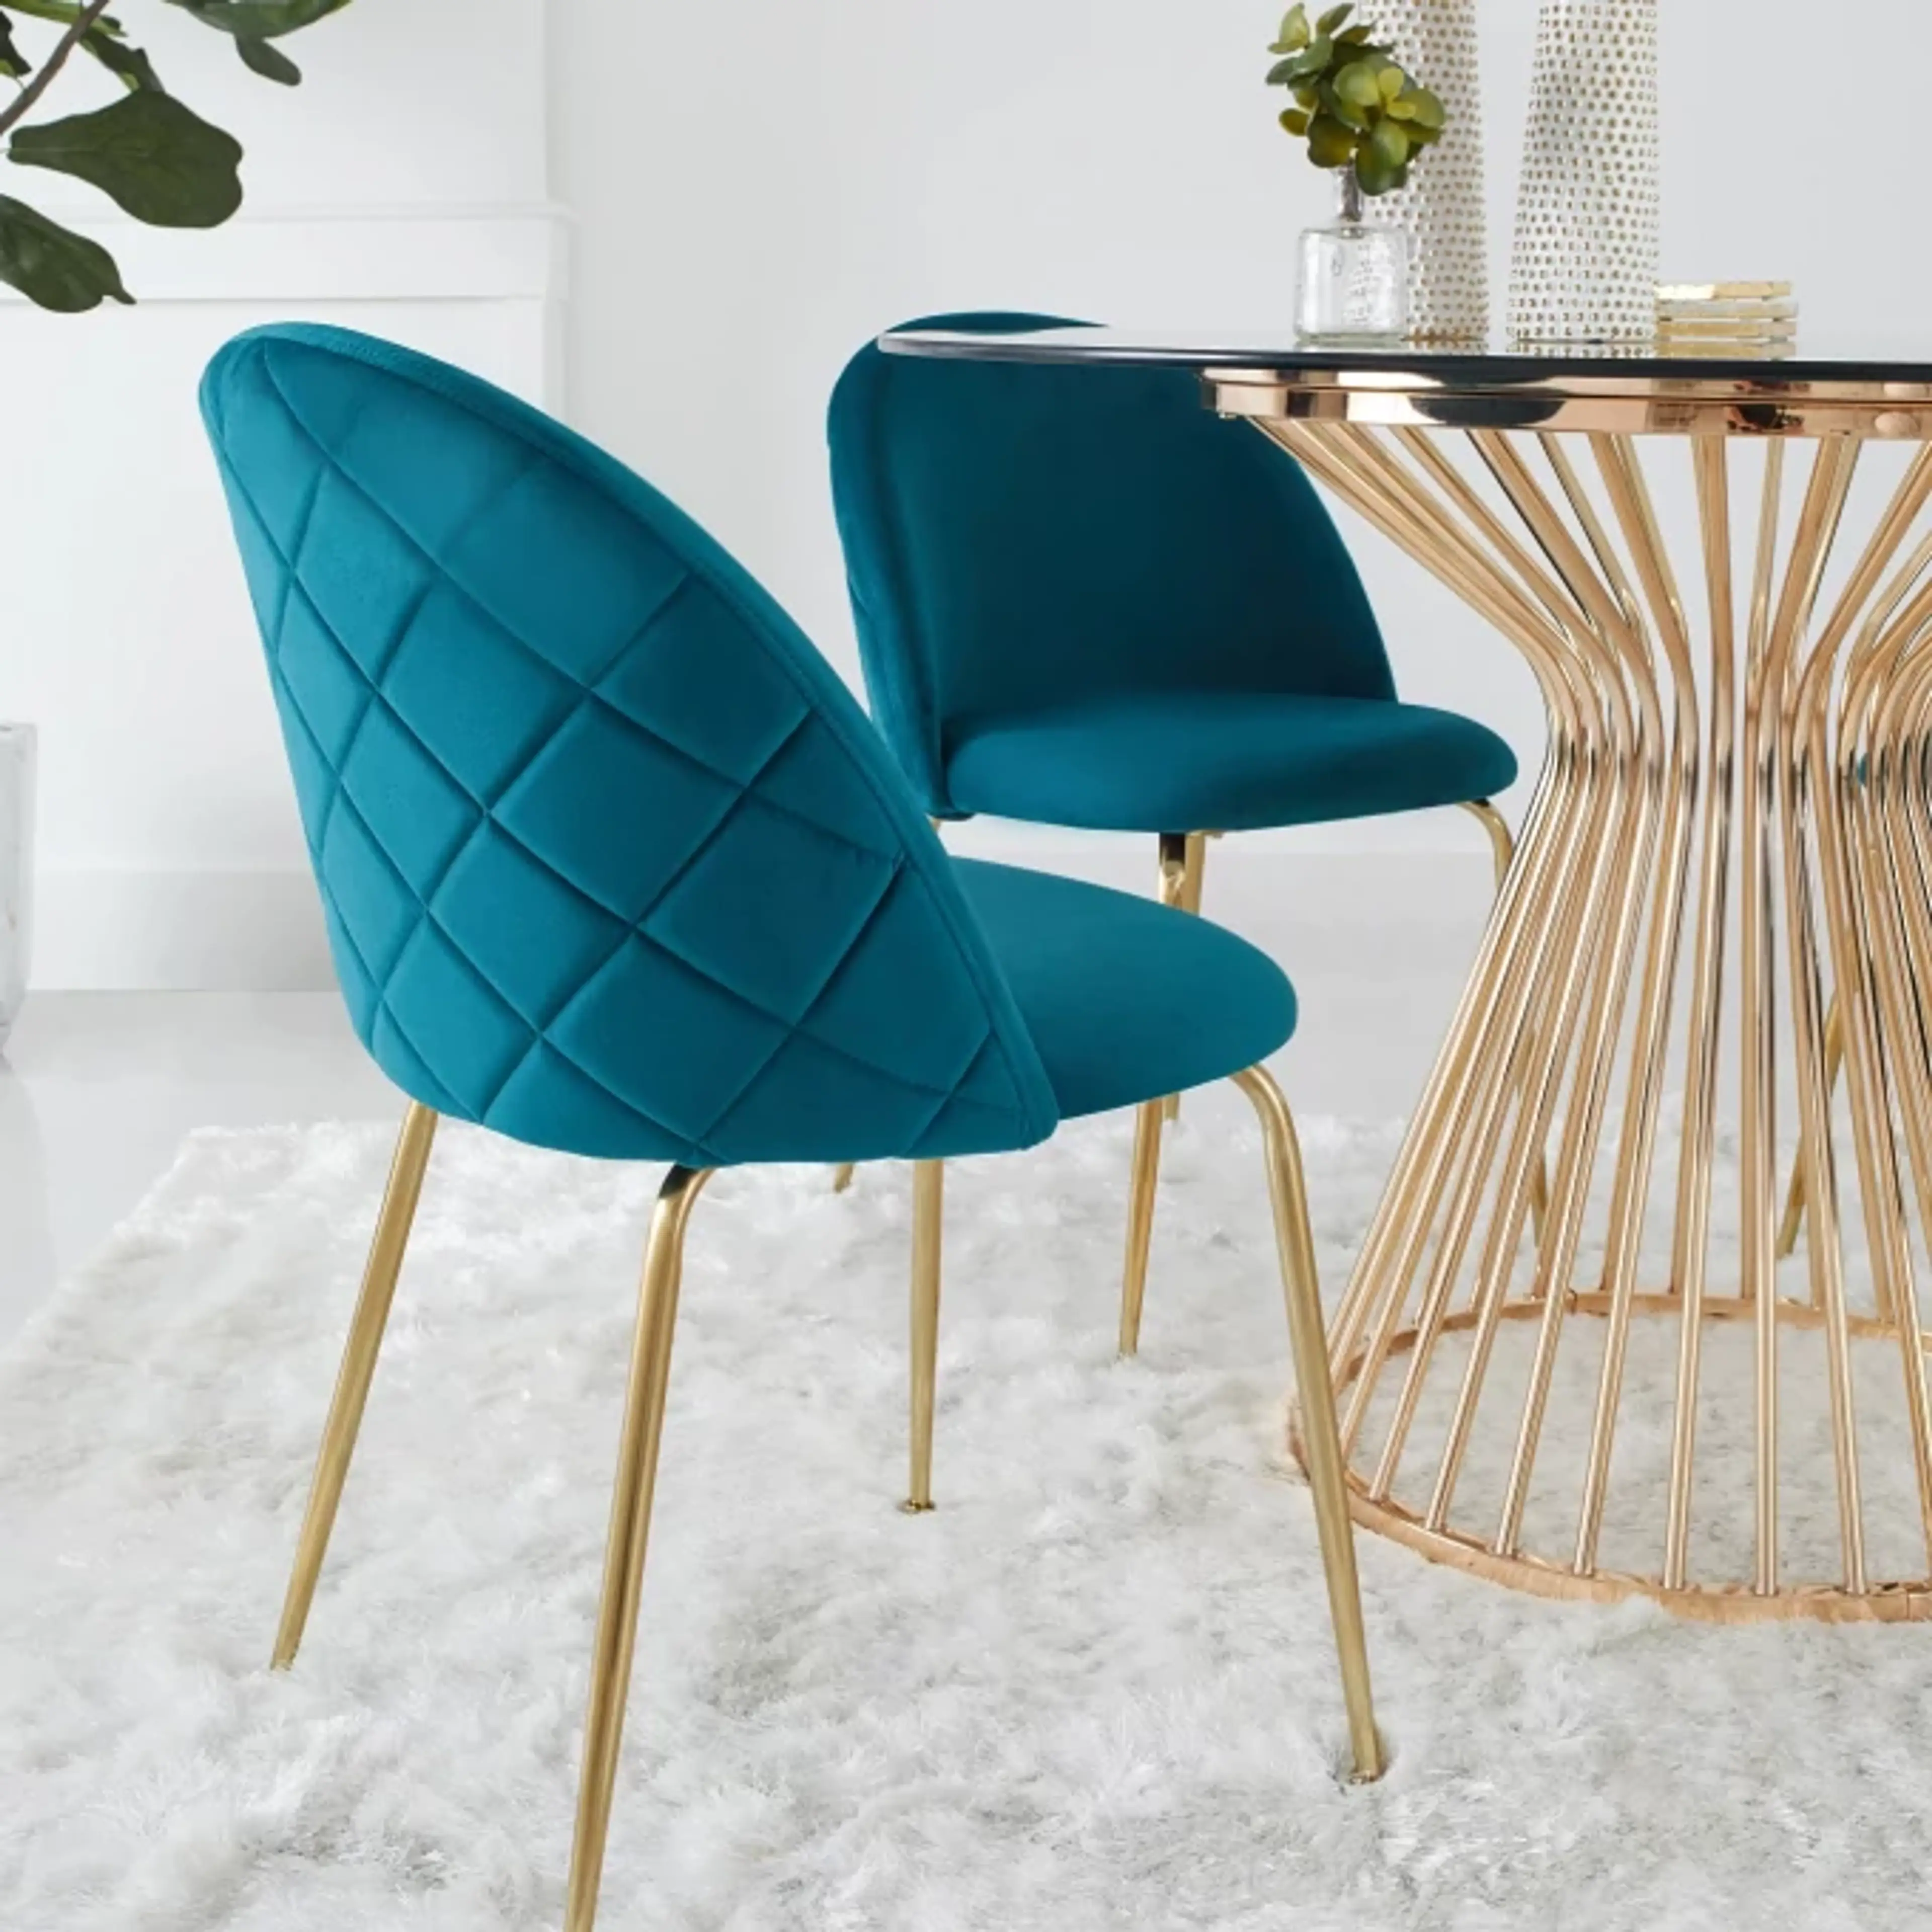 Dark Teal Upholstered Side Chair W/ Gold Legs